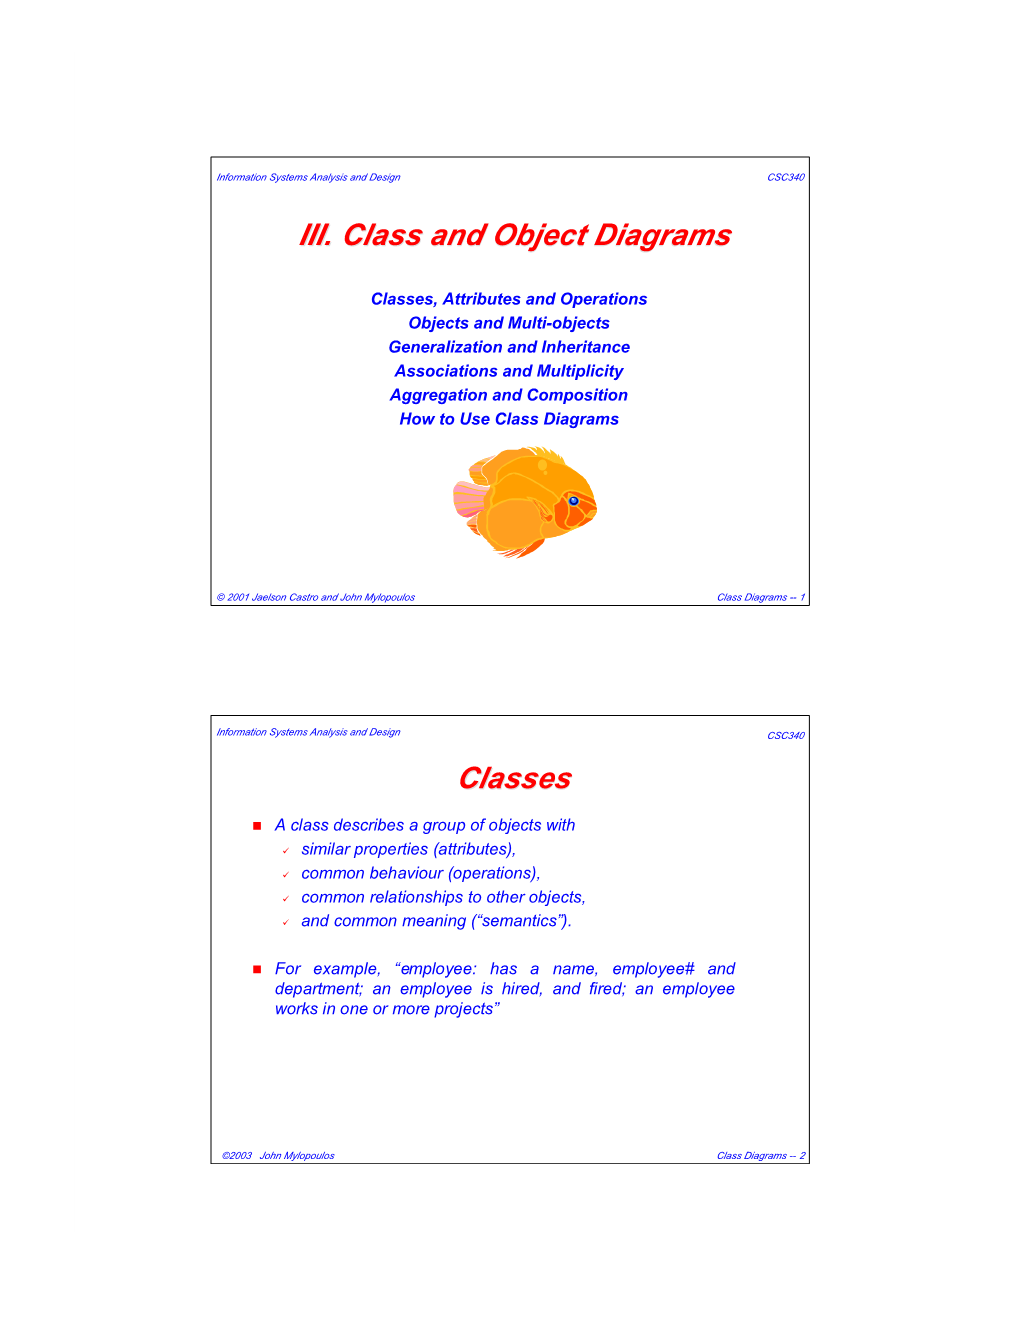 III. Class and Object Diagrams